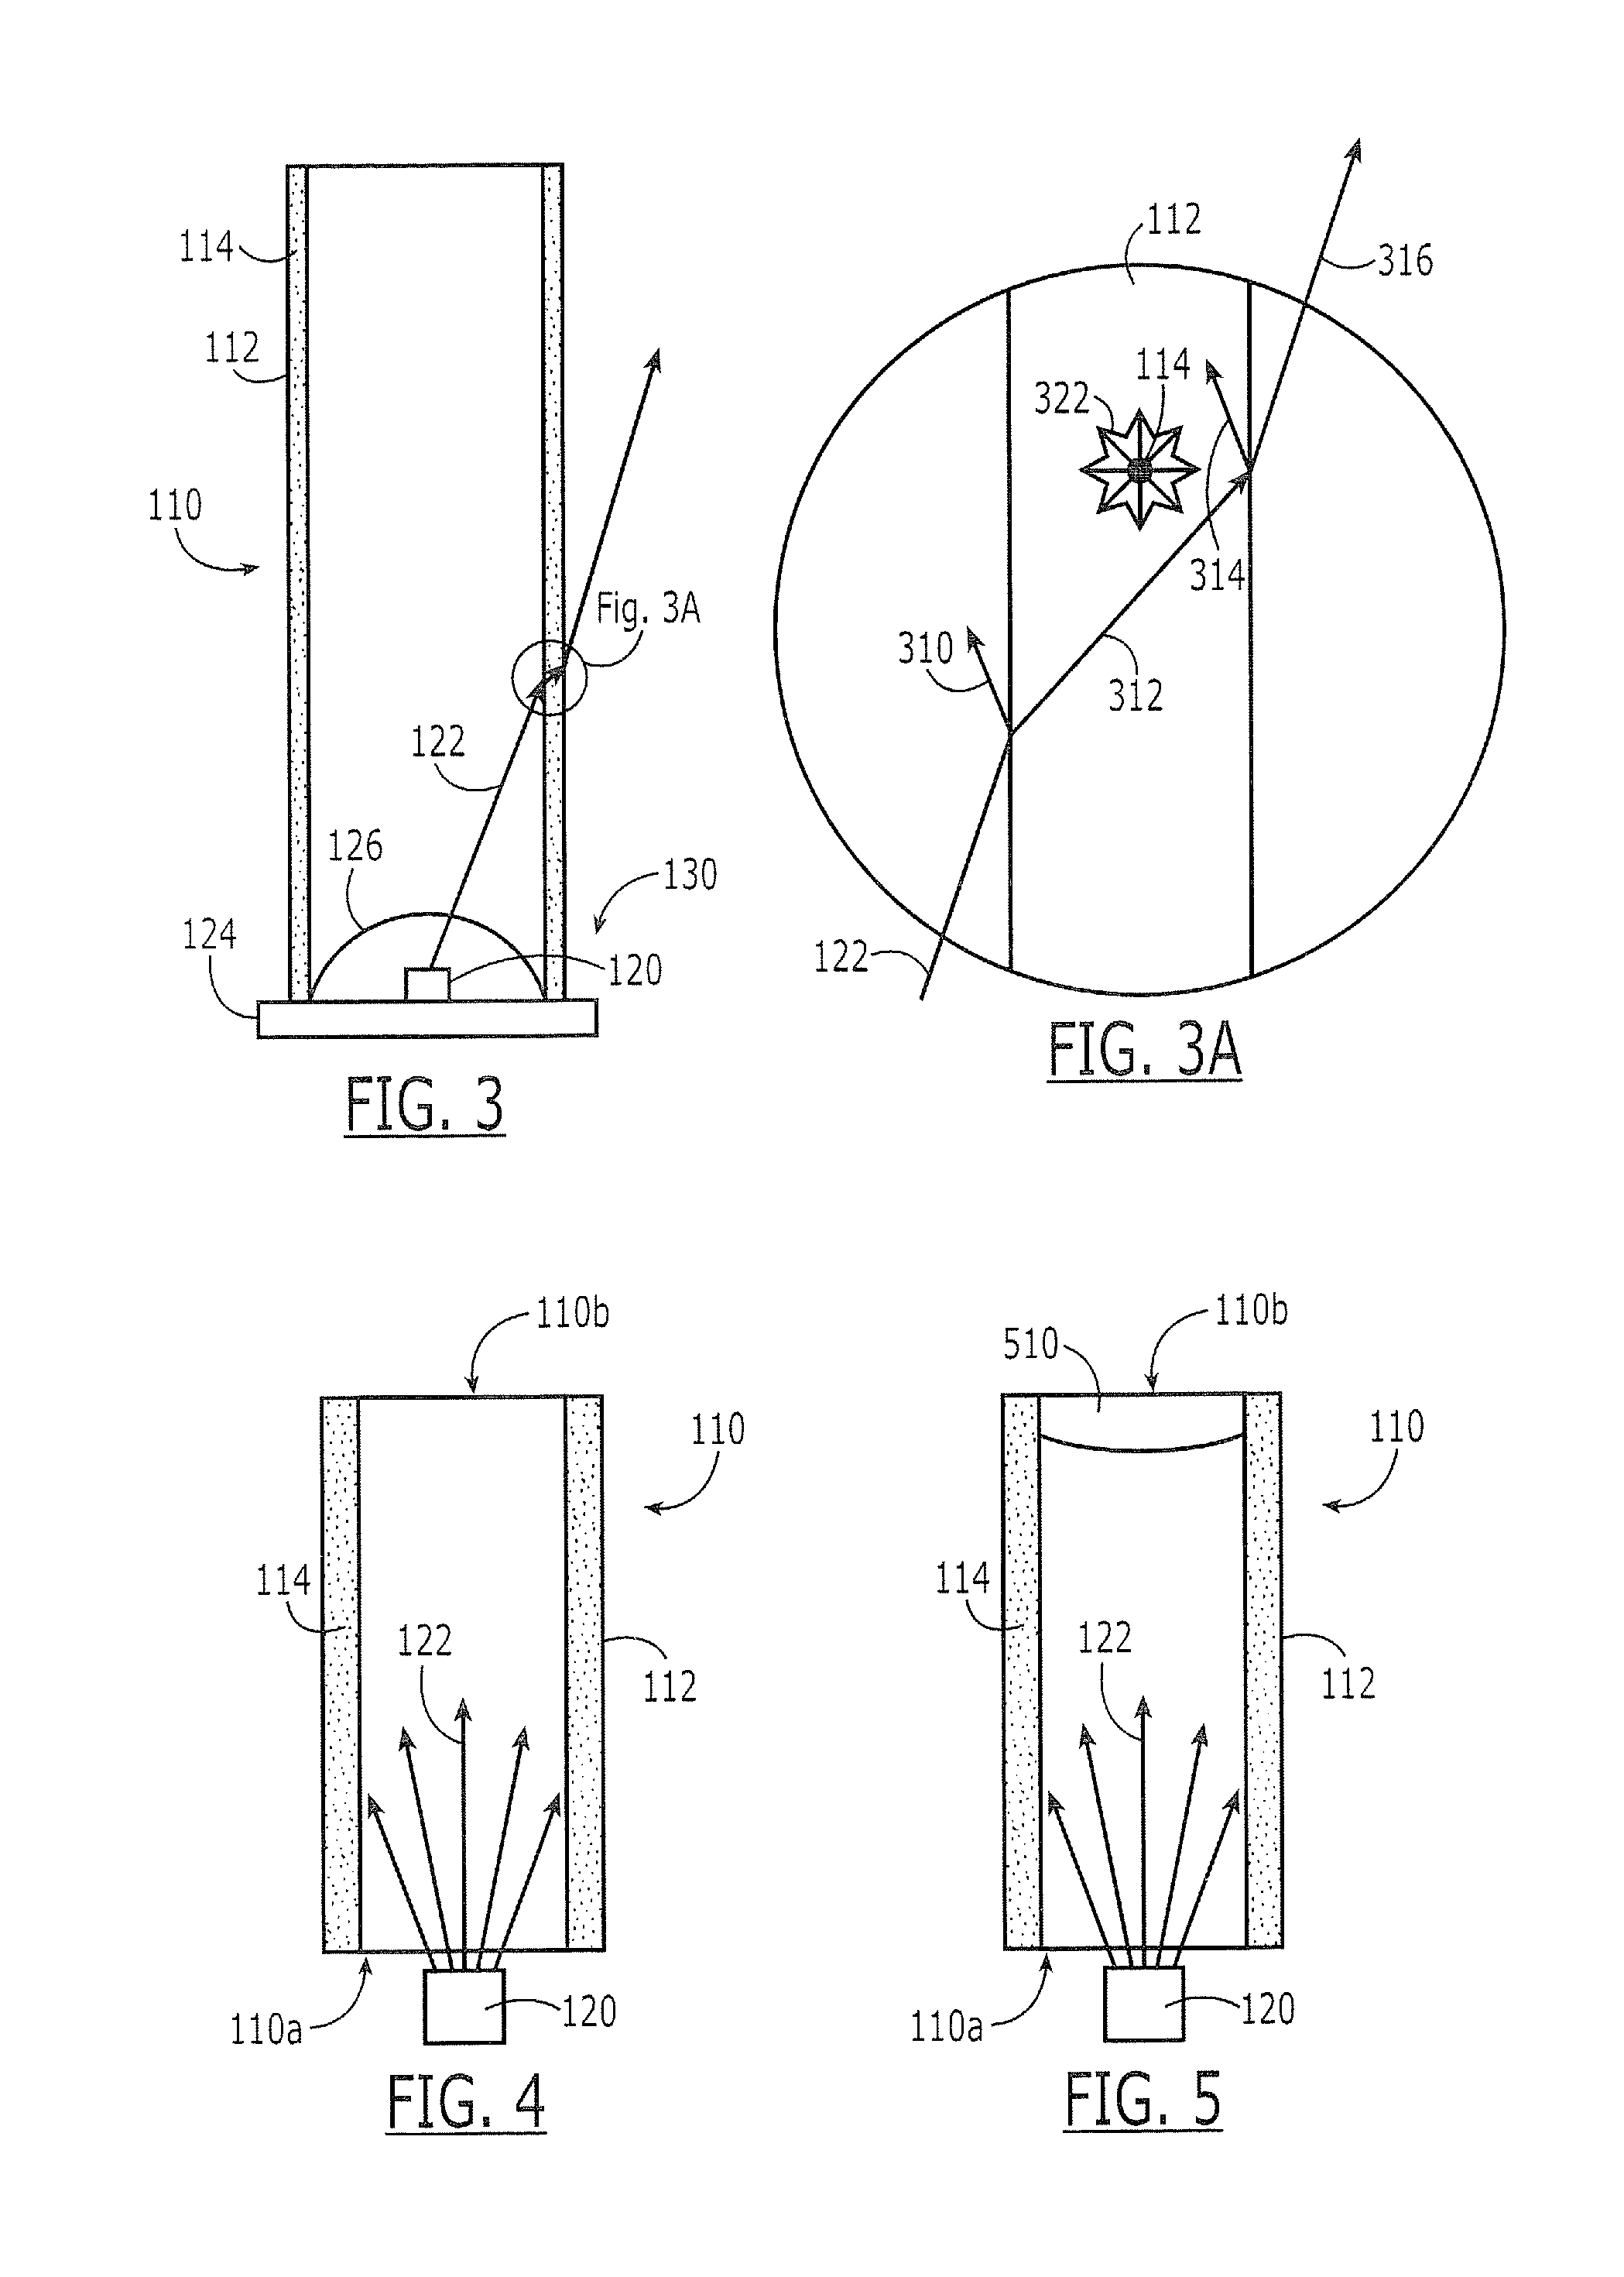 Semiconductor light emitting apparatus including elongated hollow wavelength conversion tubes and methods of assembling same